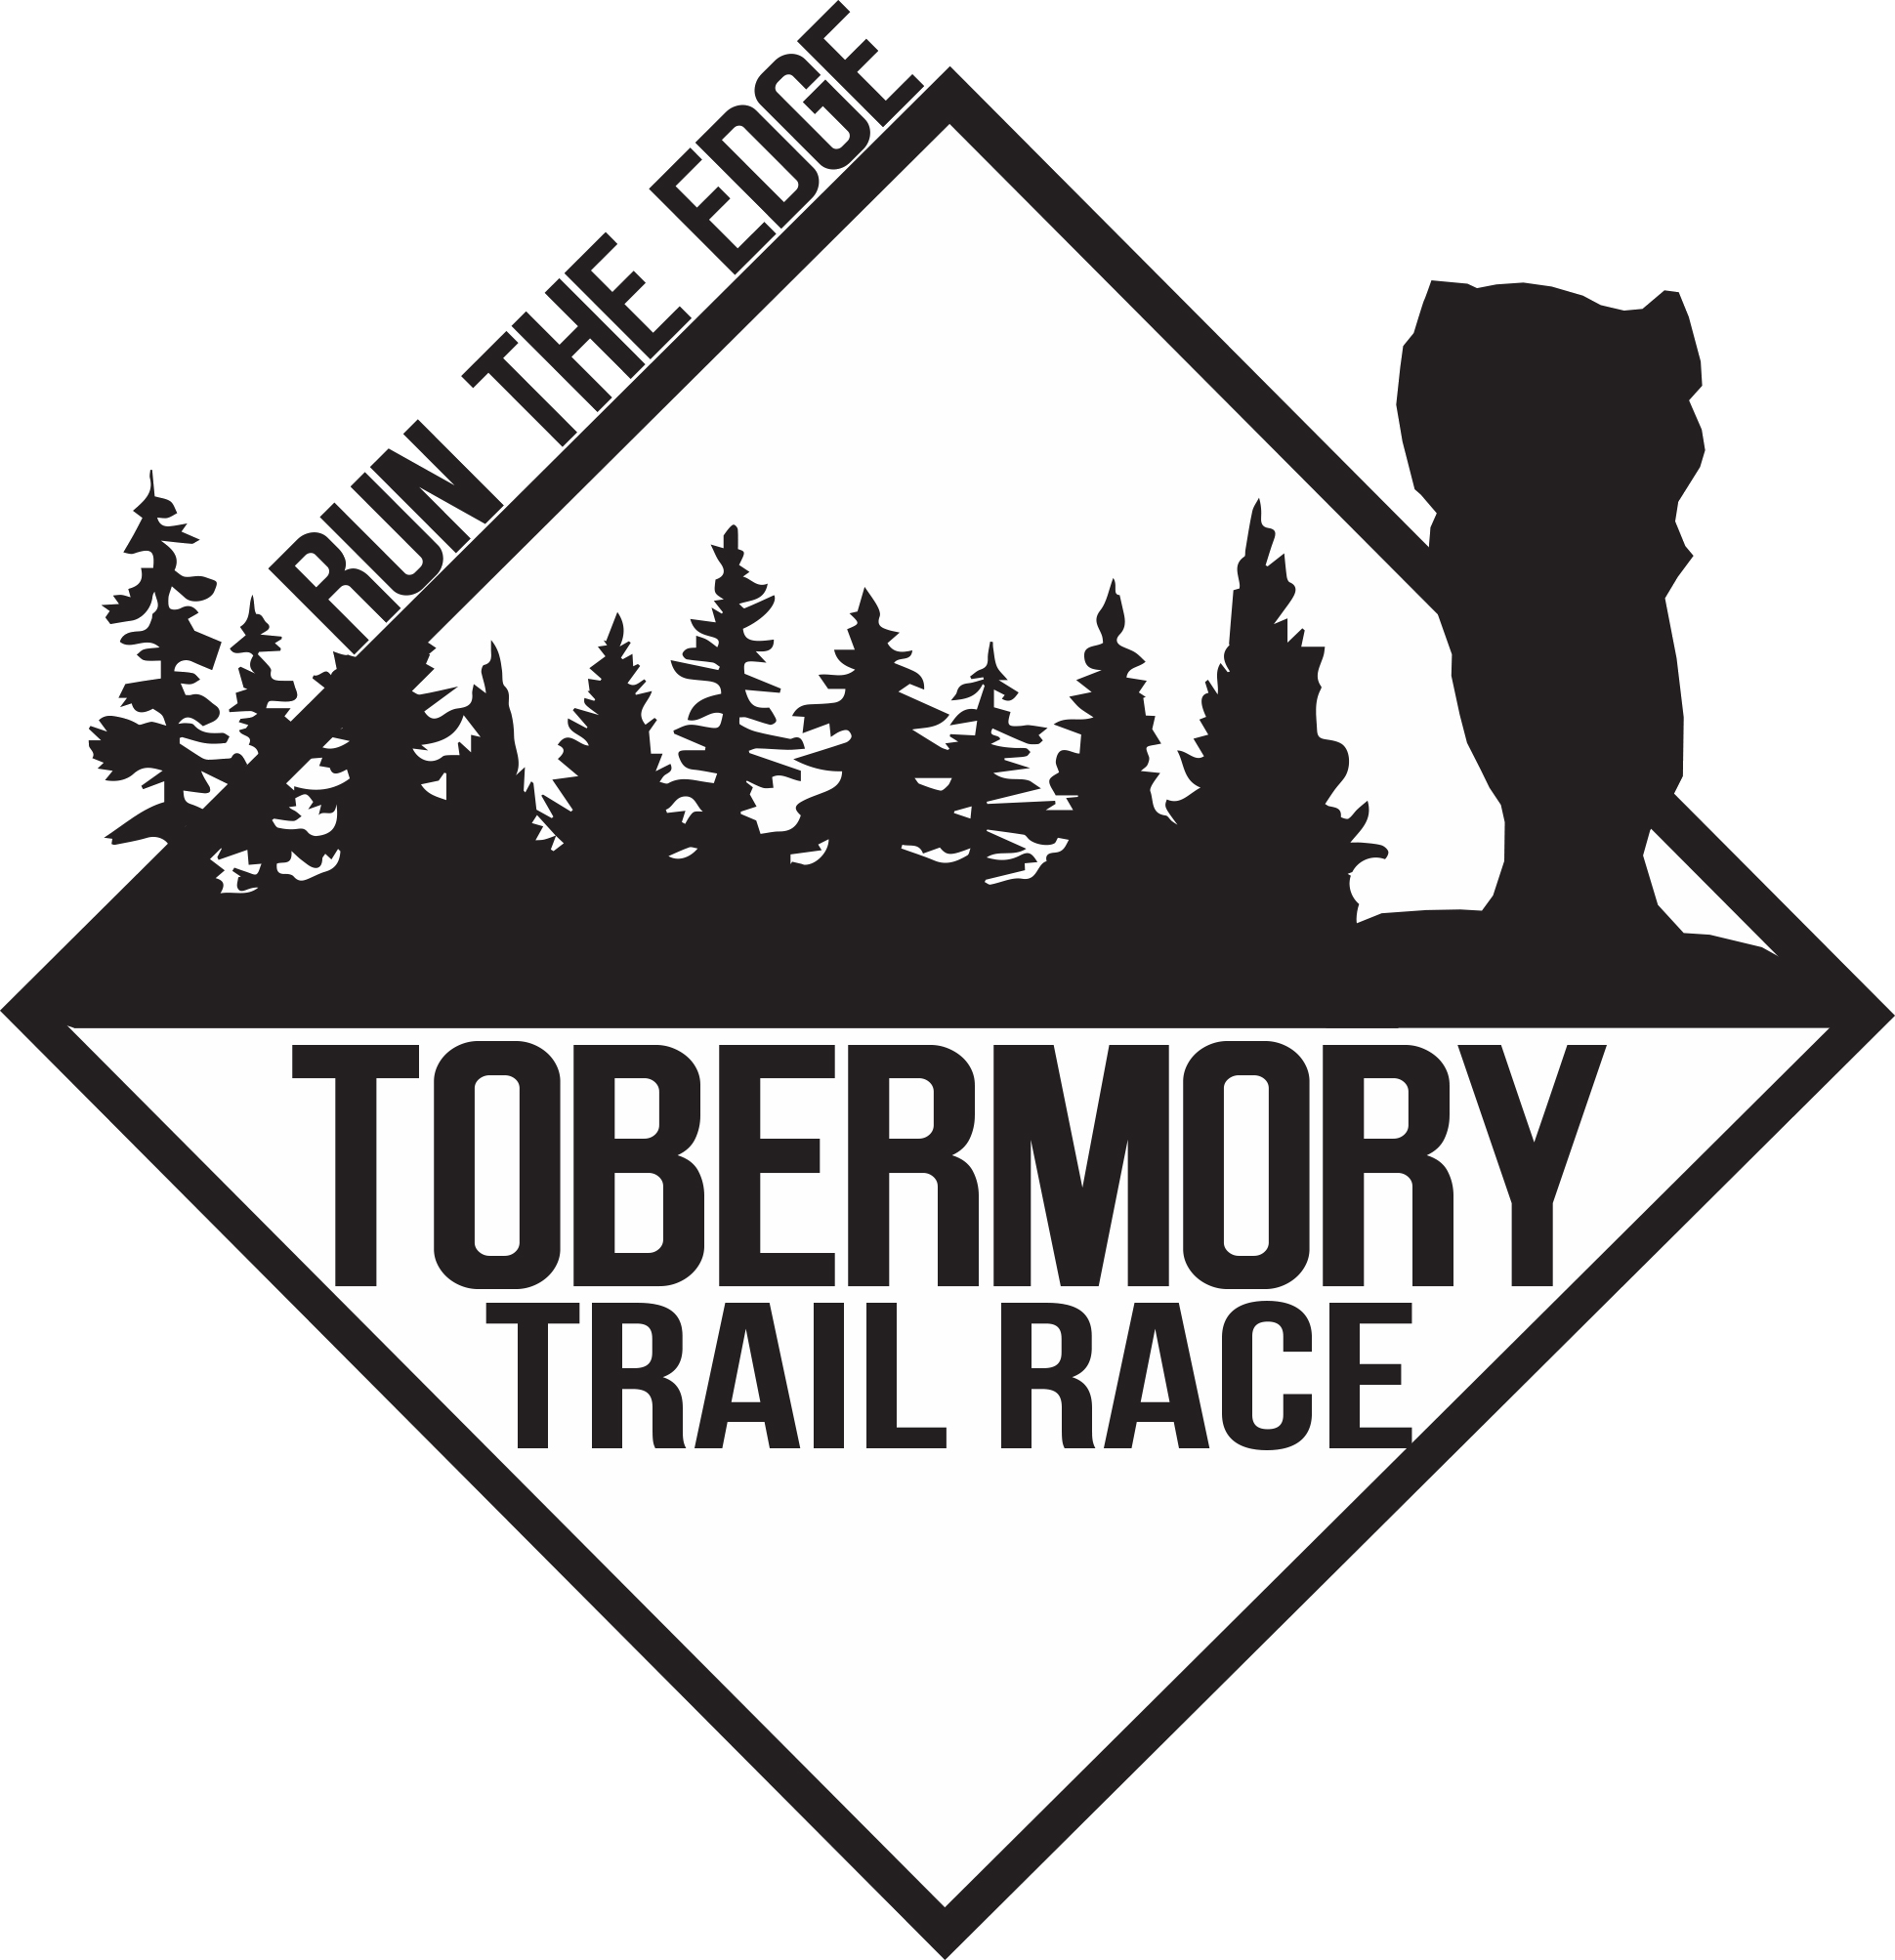 New event coming to Ontario's Bruce Trail Tobermory trail race weekend